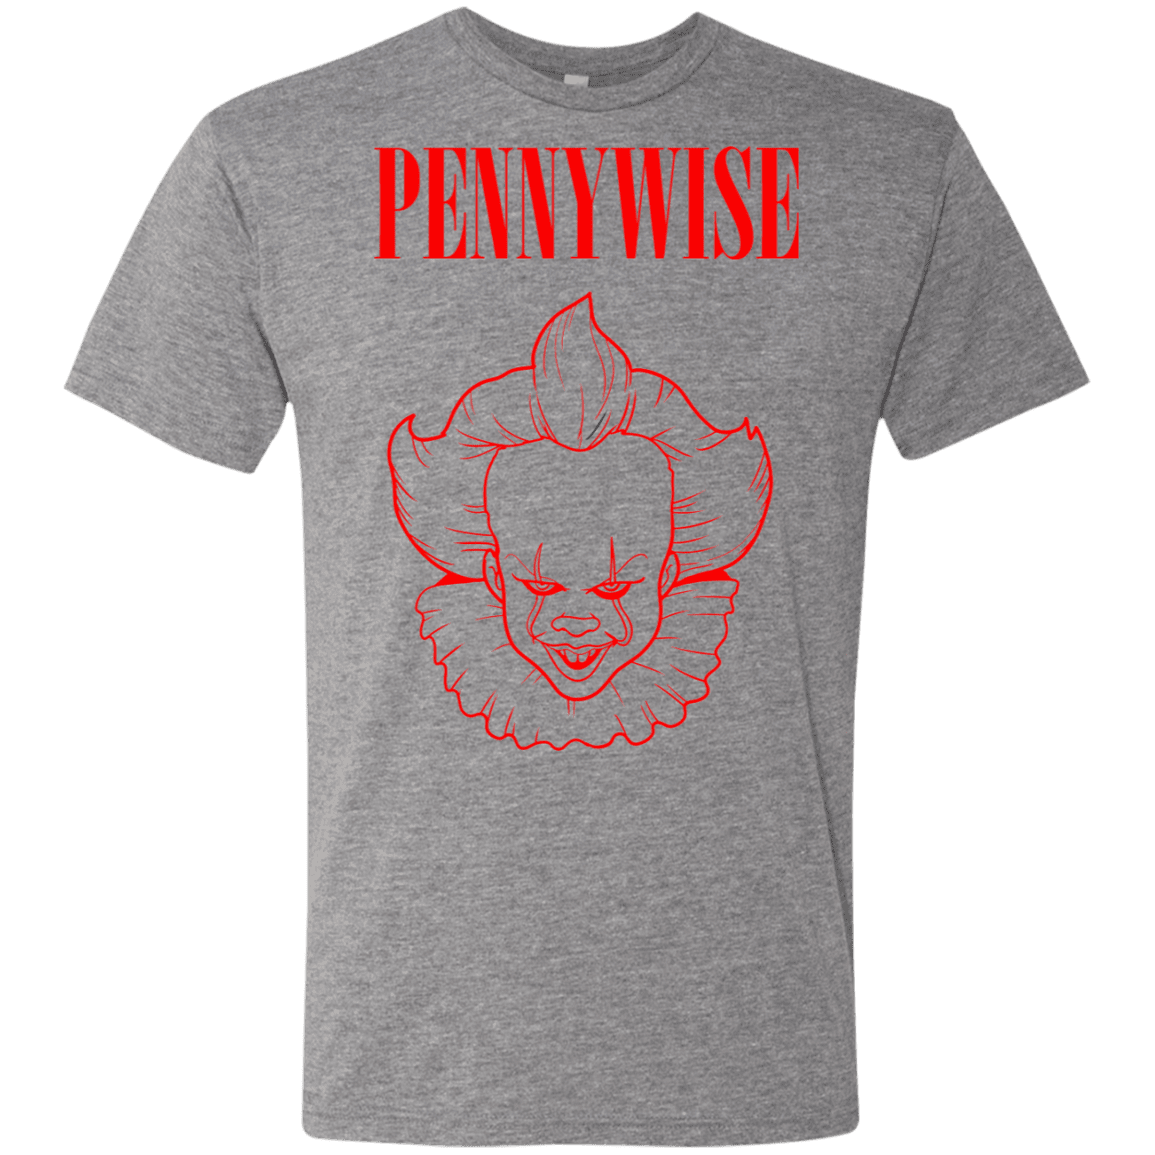 T-Shirts Premium Heather / S Pennywise Men's Triblend T-Shirt